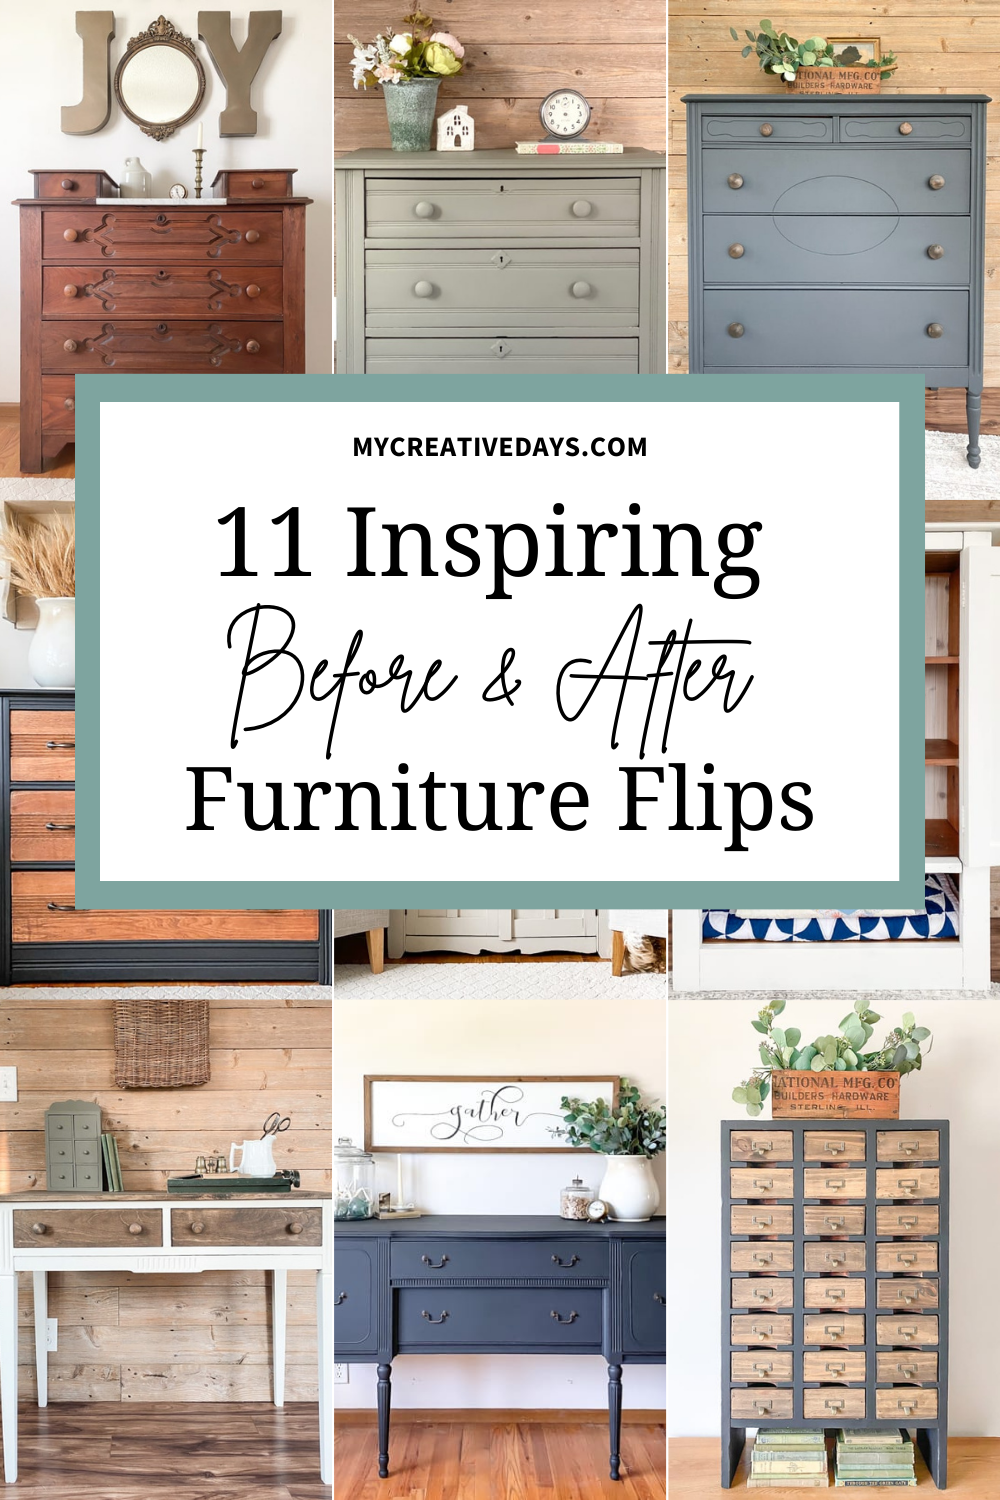 Inspiring Before-and-After Furniture Flips